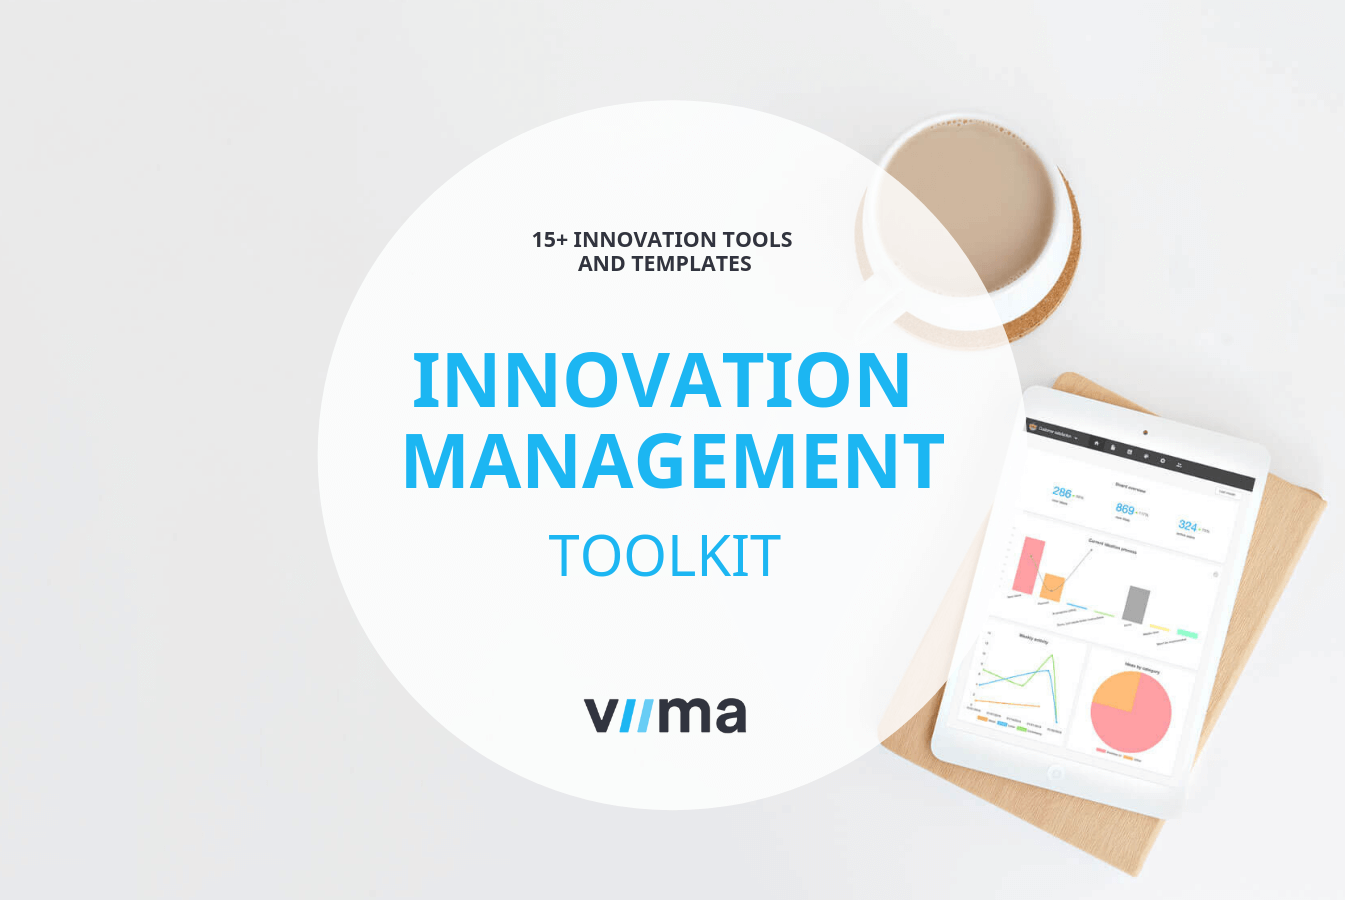 Innovation Management Toolkit featured